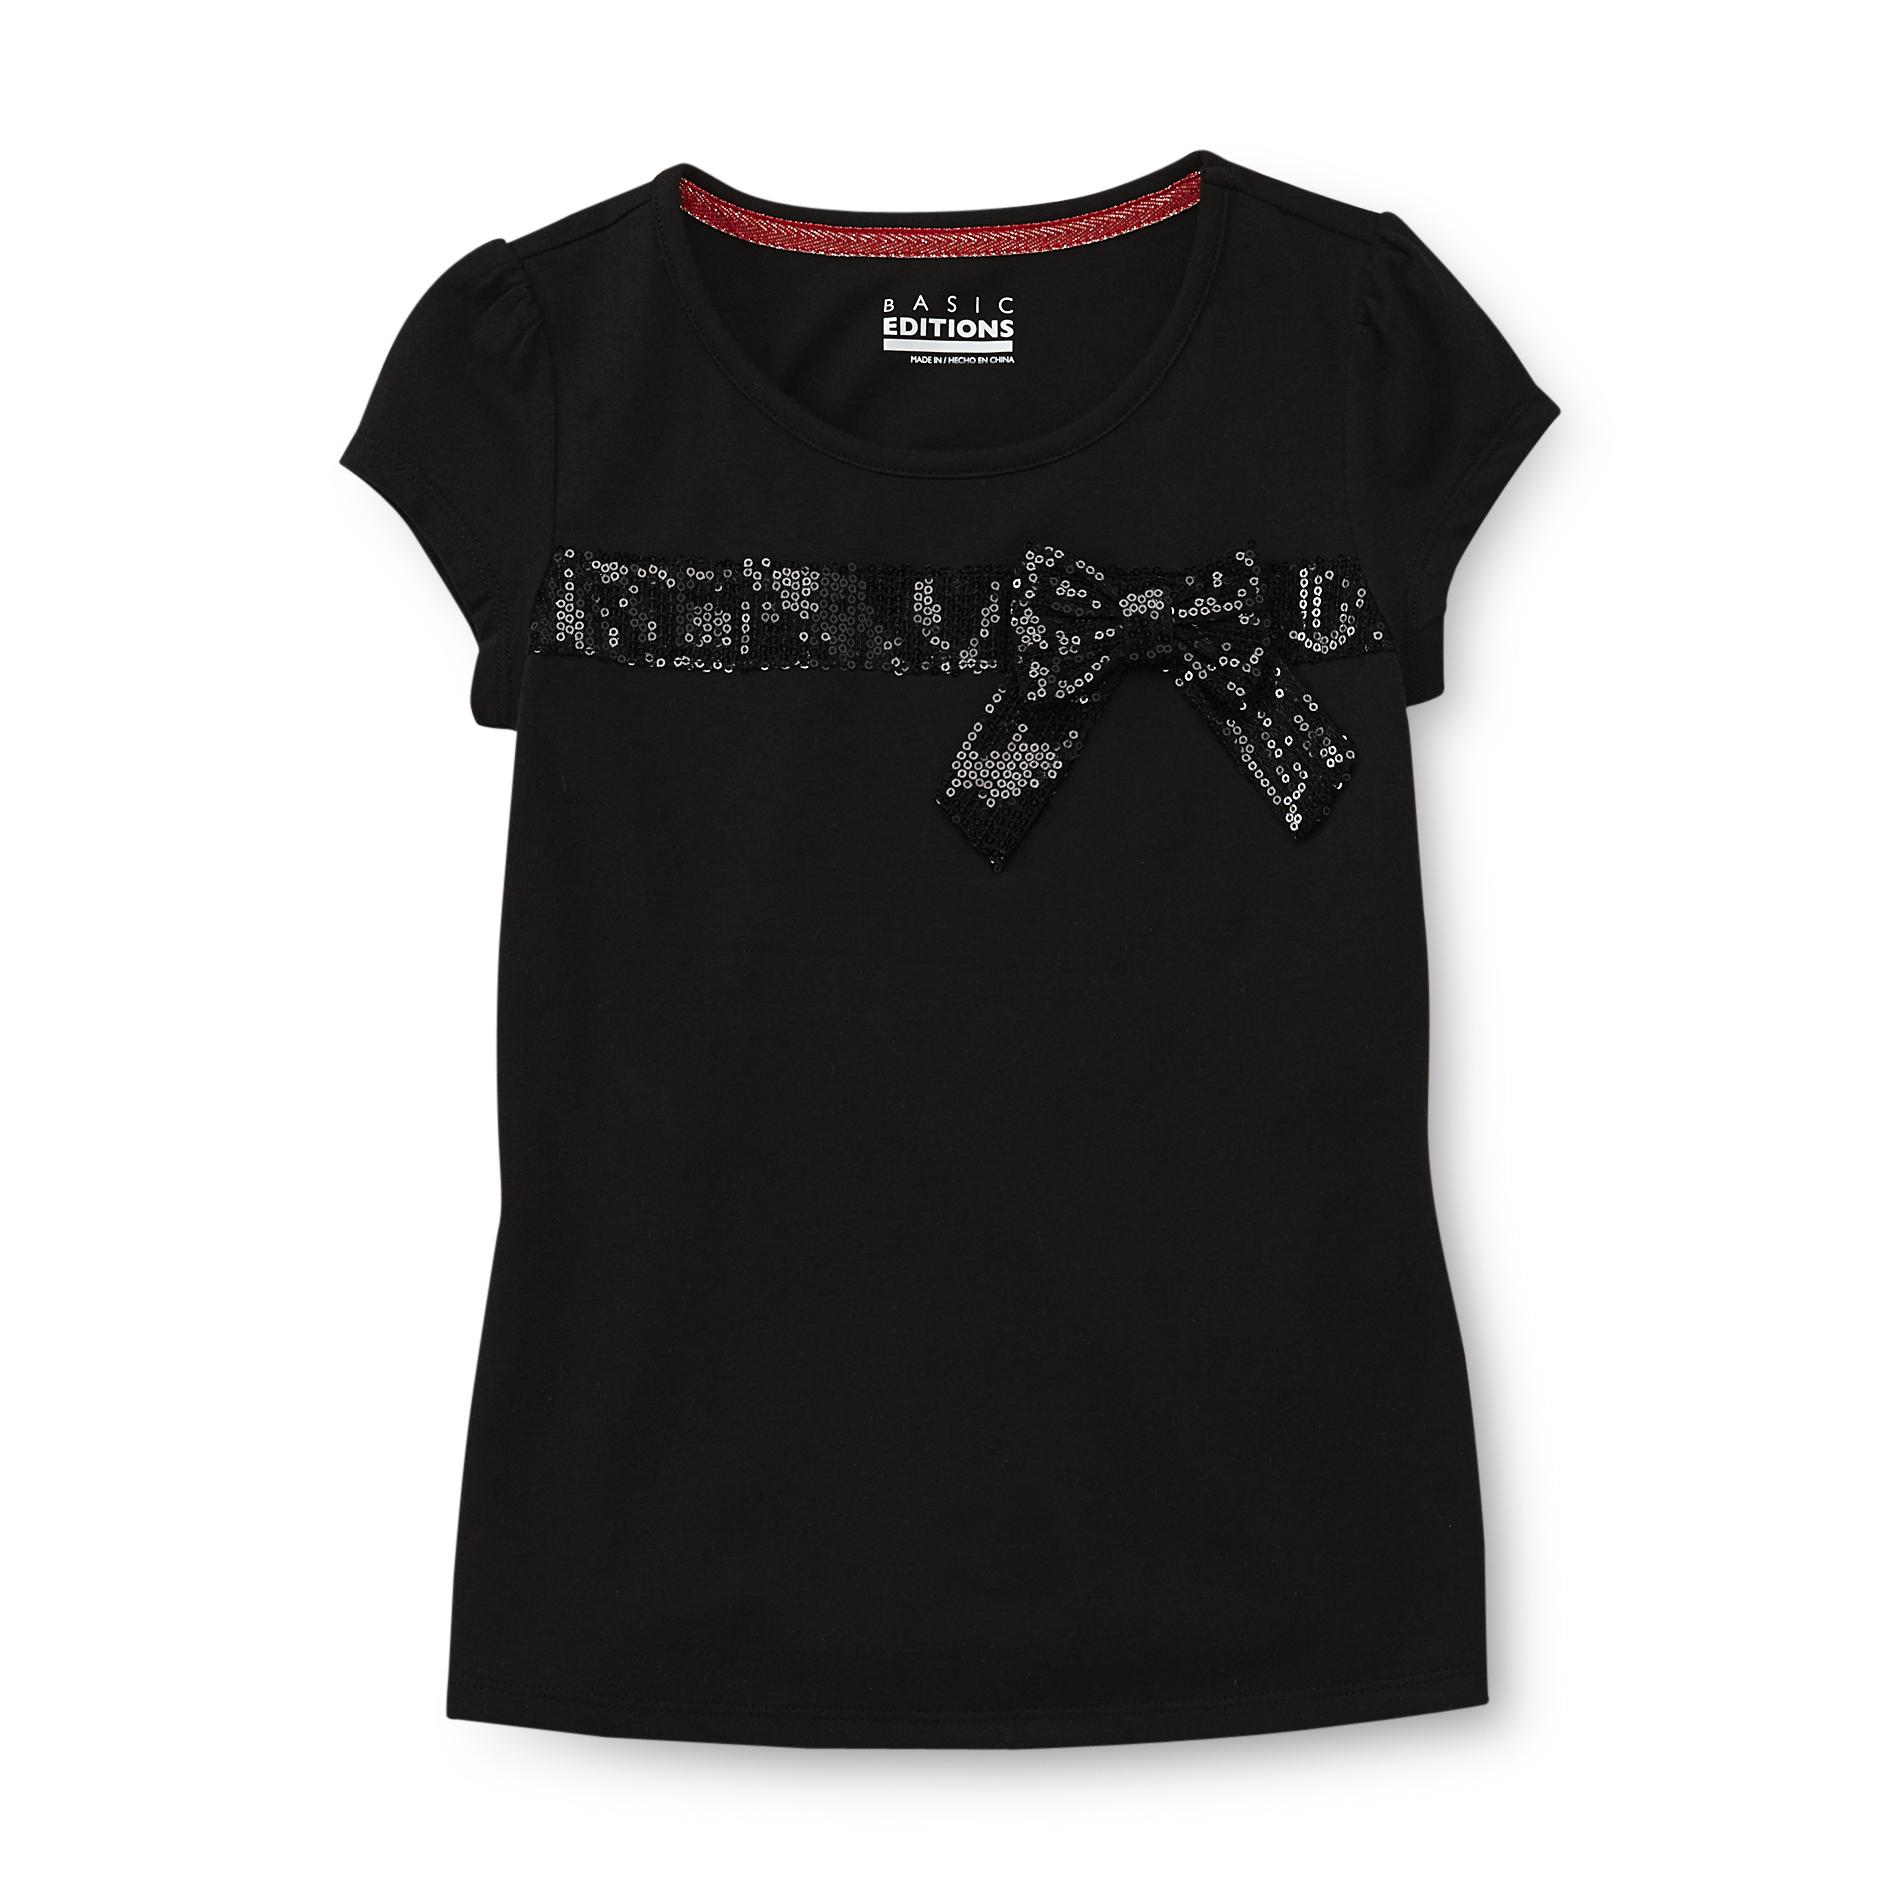 Basic Editions Girl's T-Shirt - Sequined Bow